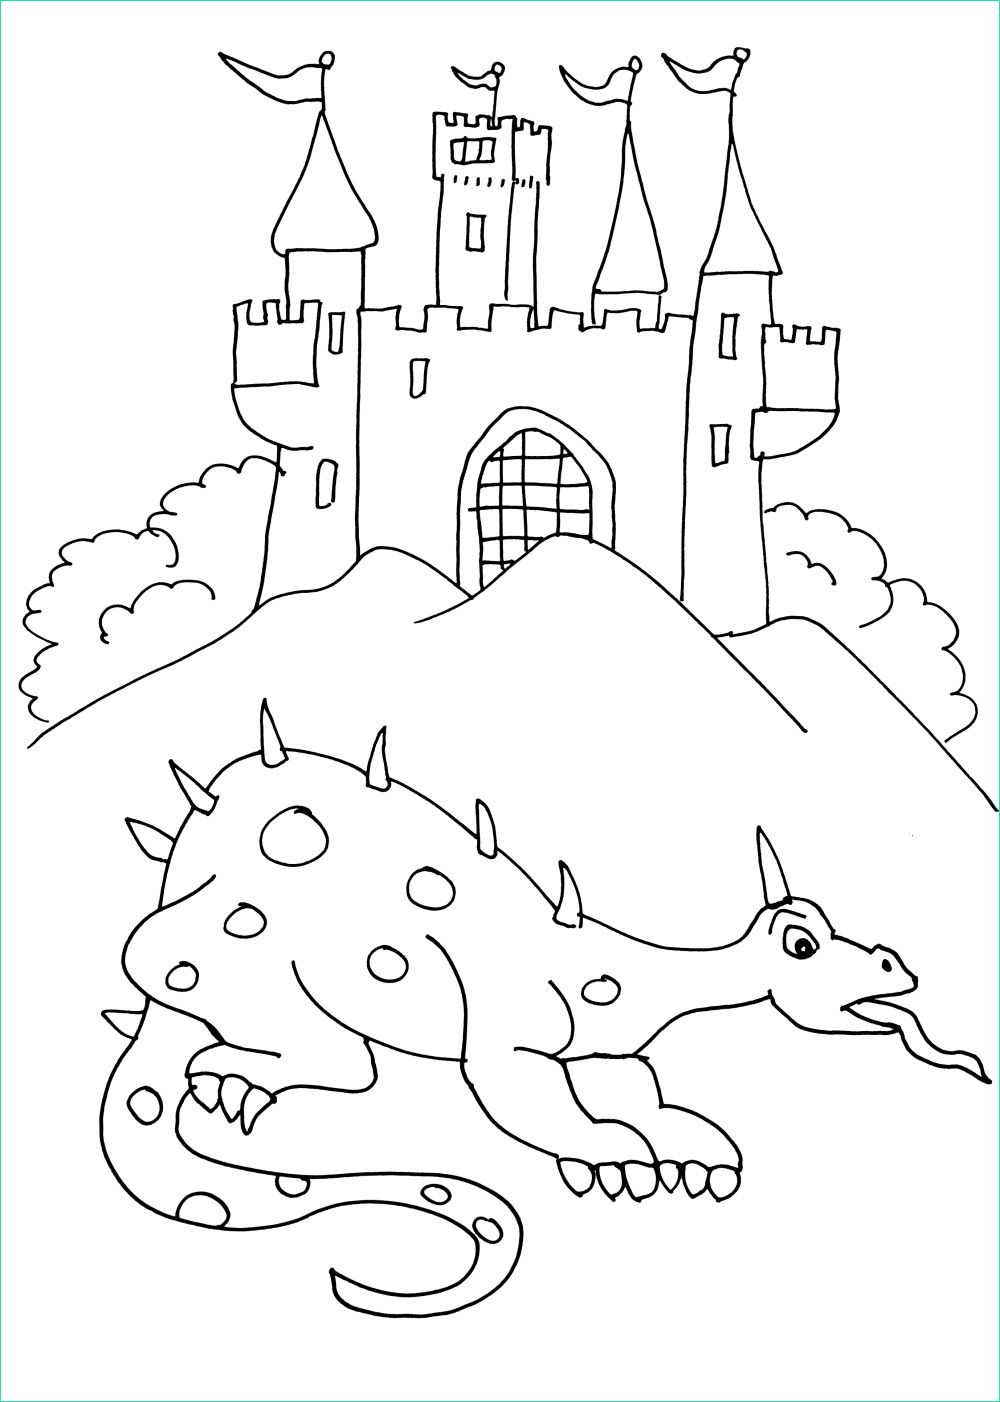 image=chevaliers et dragons coloriage chevaliers dragons 2 1